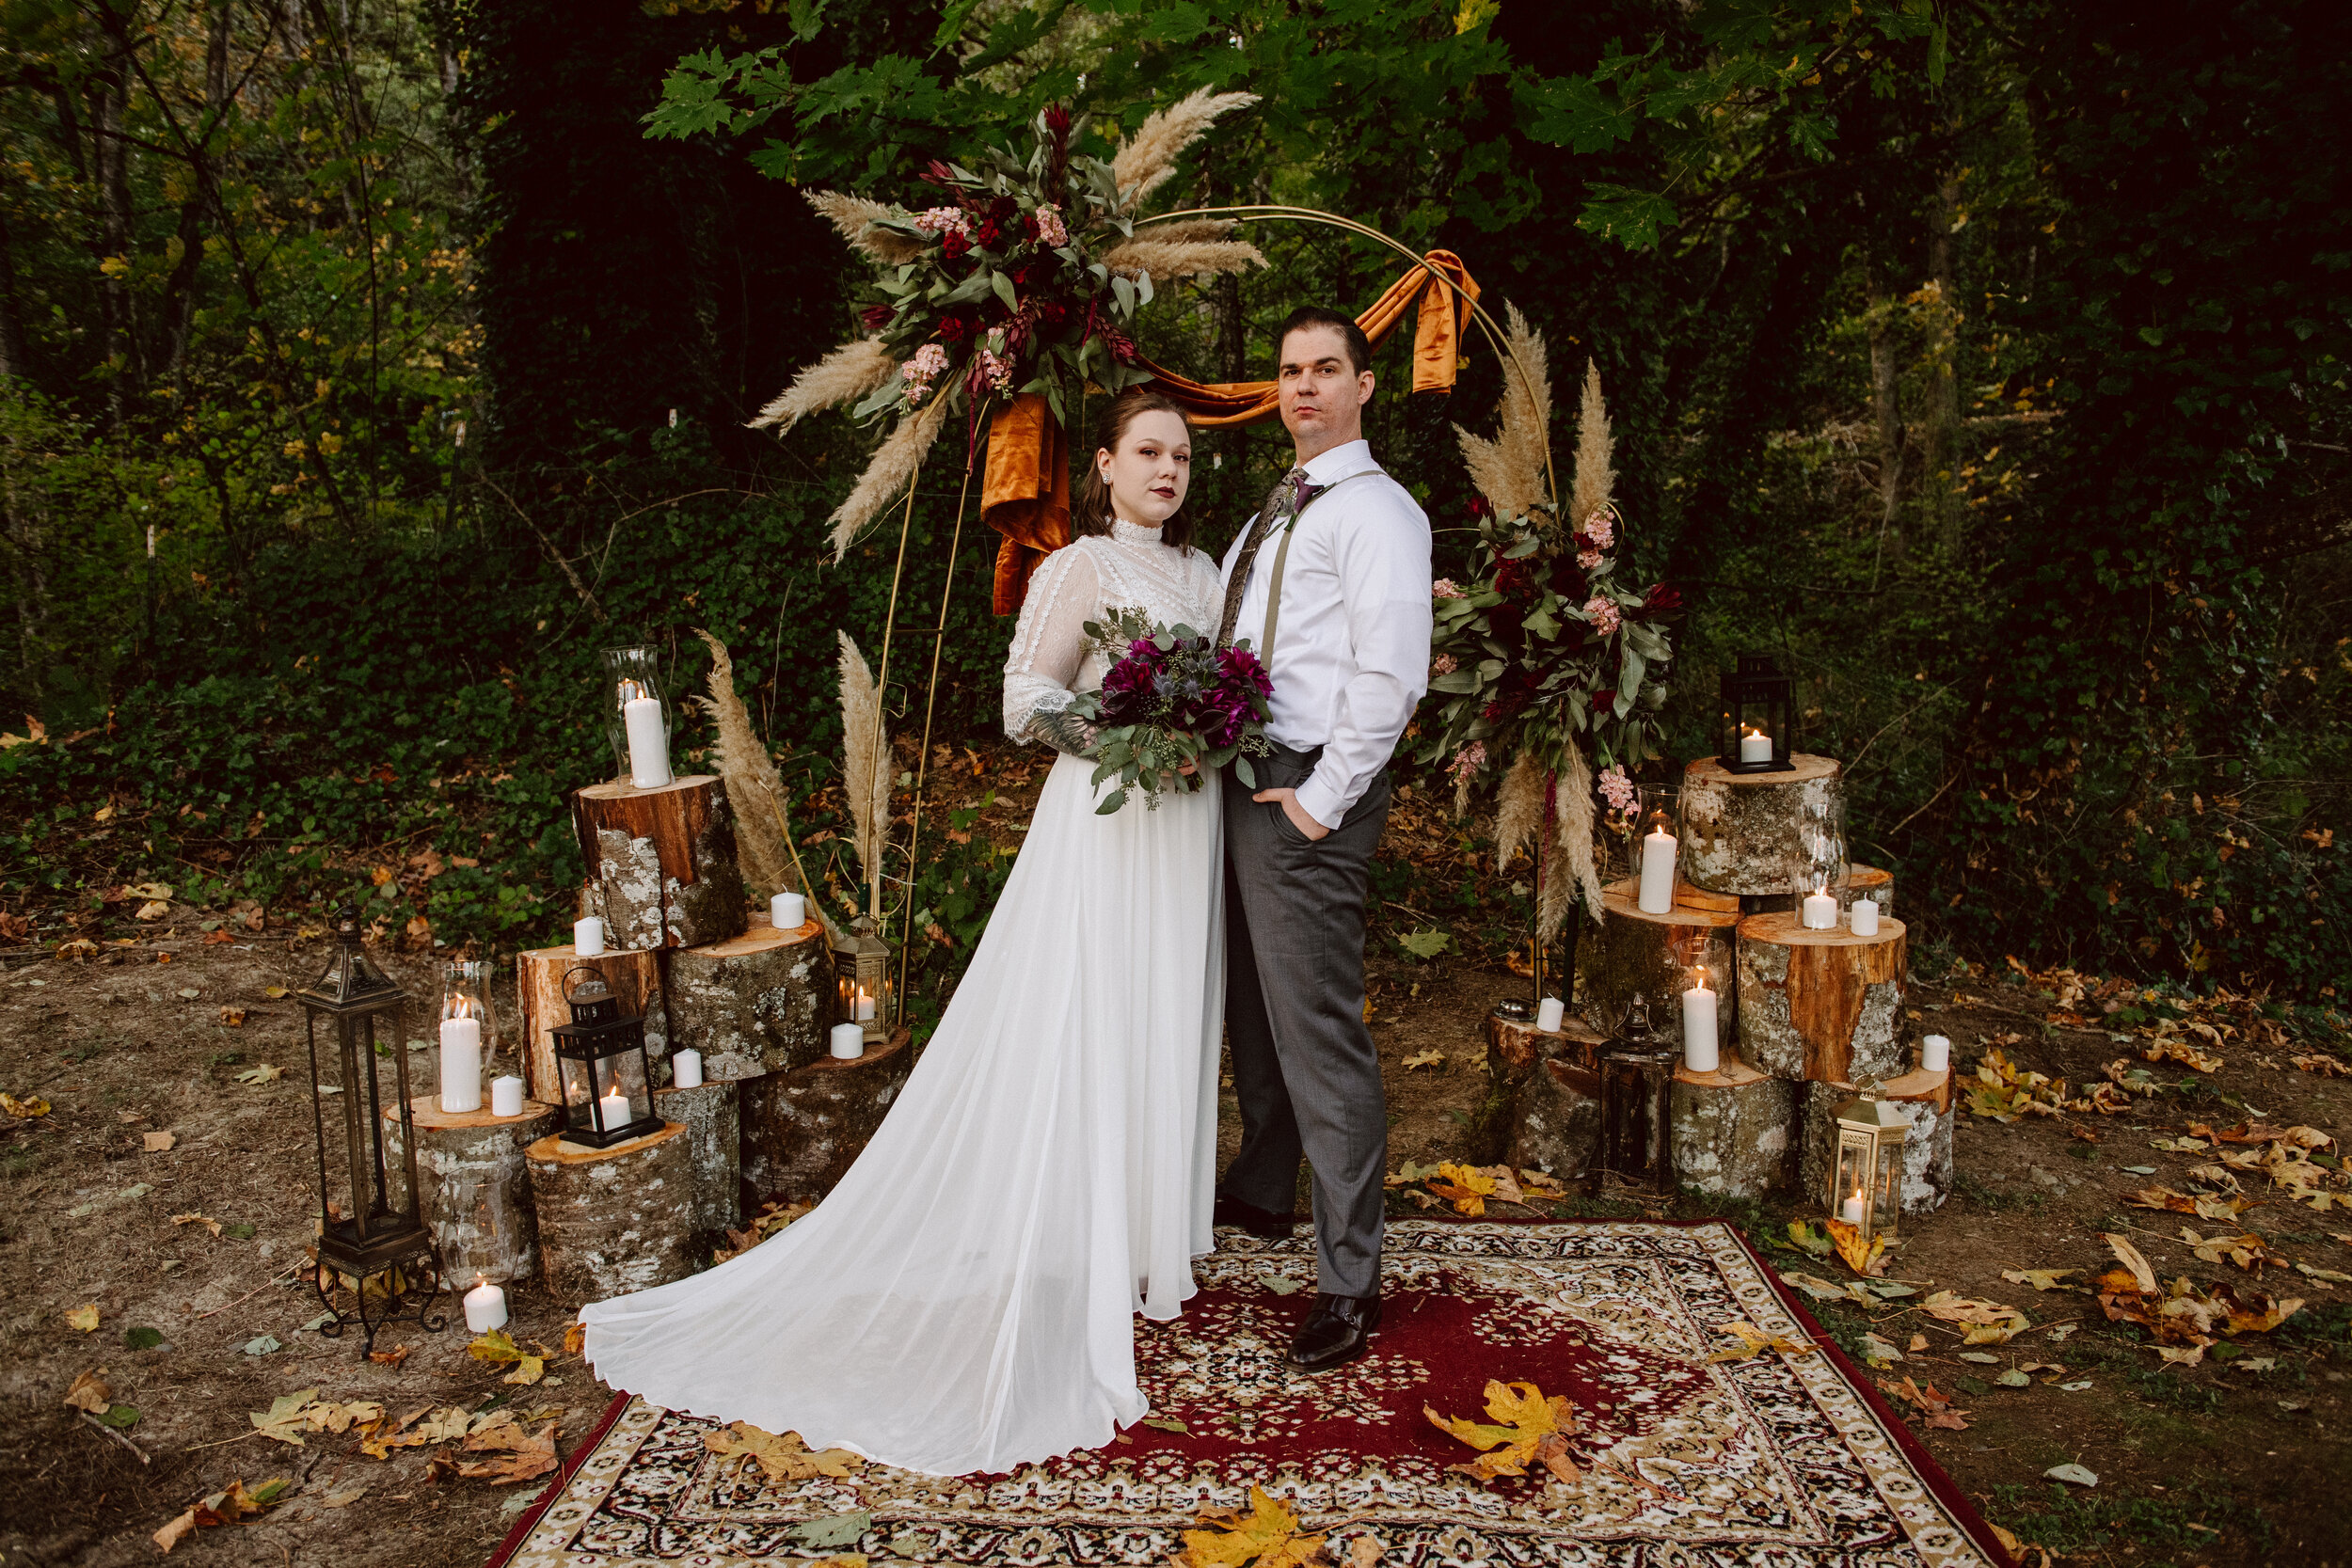 Bride in a gothic style dress holding a purple and green bouquet standing next to groom in gray pants with suspenders at their wedding altar adorned with fall florals, candles, and fallen leaves atop a vintage rug